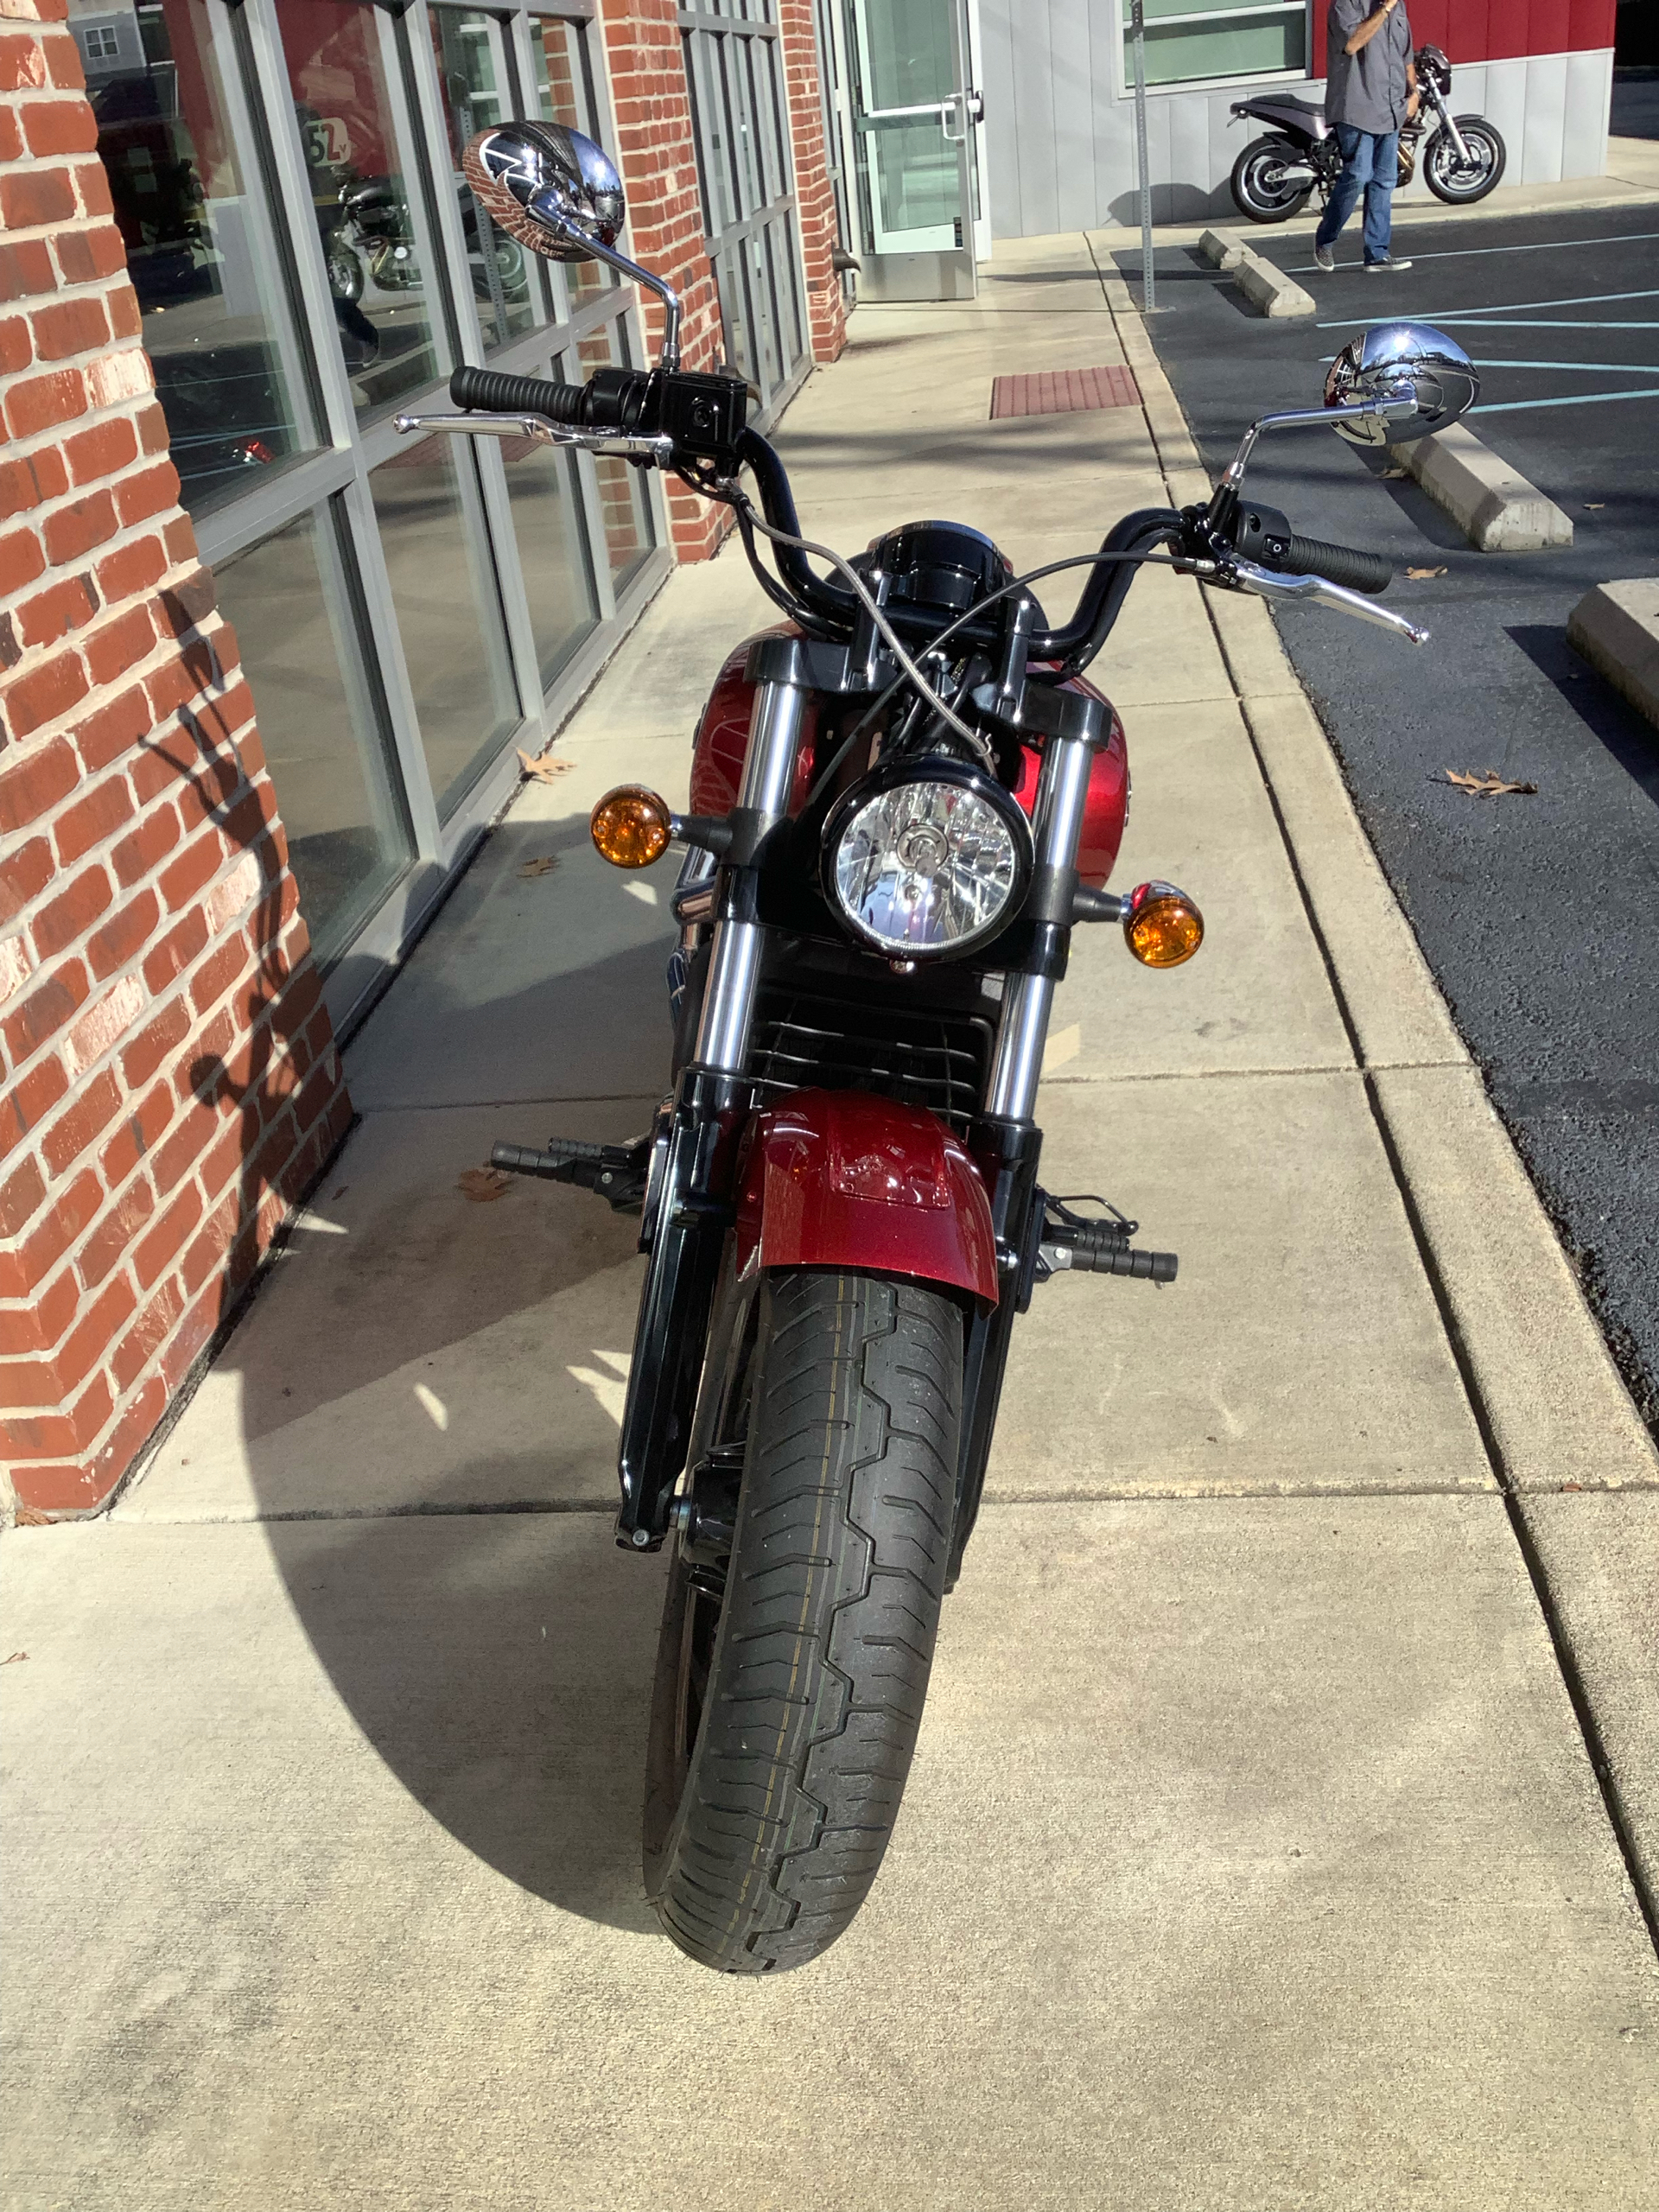 2021 Indian Scout® Sixty ABS in Newport News, Virginia - Photo 4